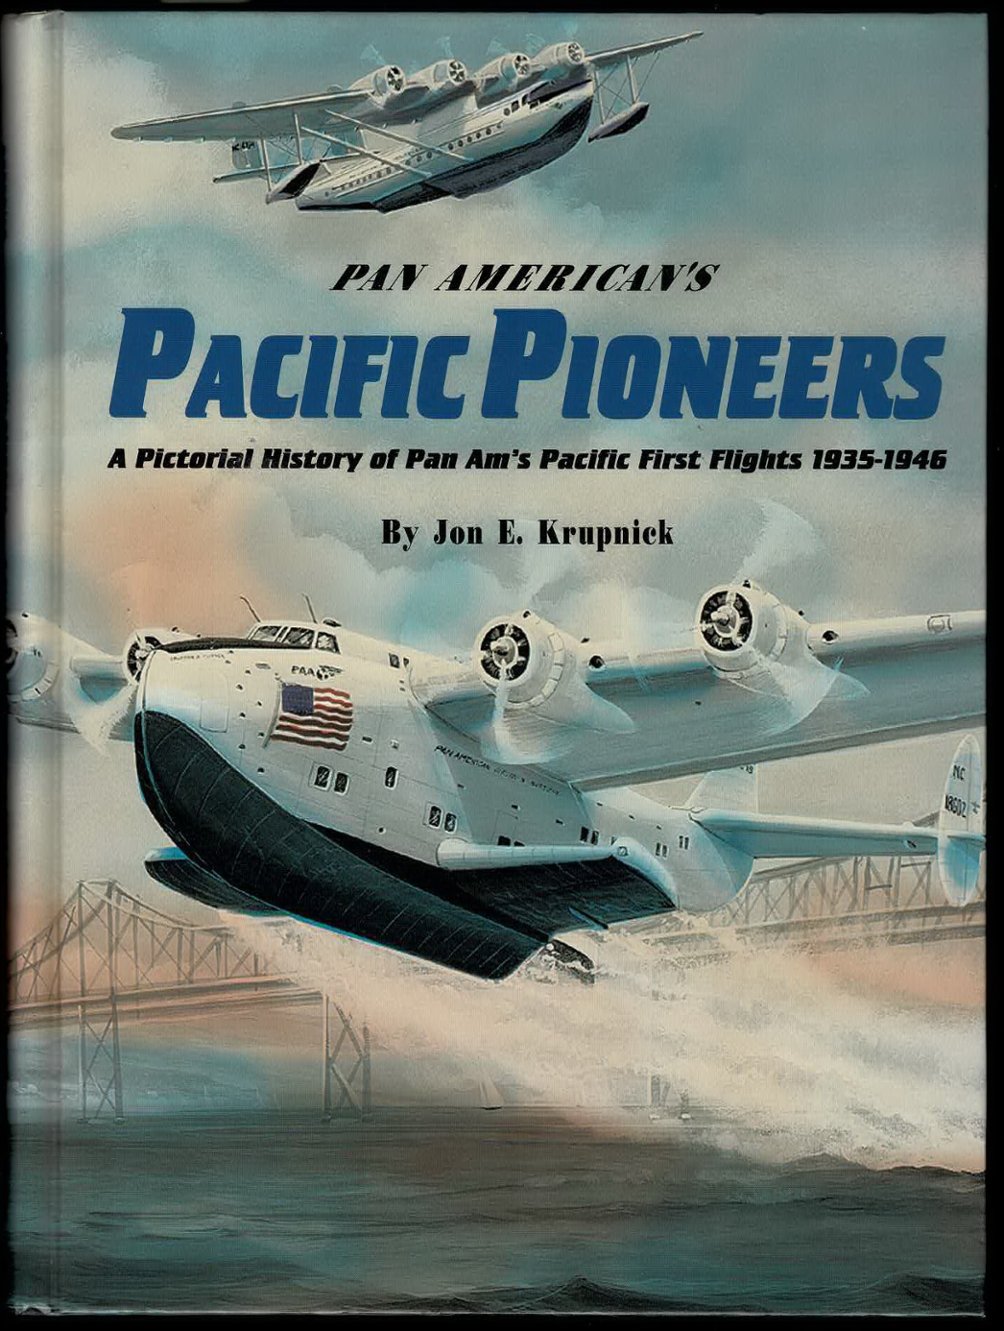 Pan American Pacific Pioneers, a Pictorial History of Pan Am's Pacific First Flights 1935-46, by Jon E. Prupnick, 1997, autographed by the author, hardbound, 314 pages, like new, color, an incredible source on the first flight covers and Pan Am's history (3 lb 10 oz)